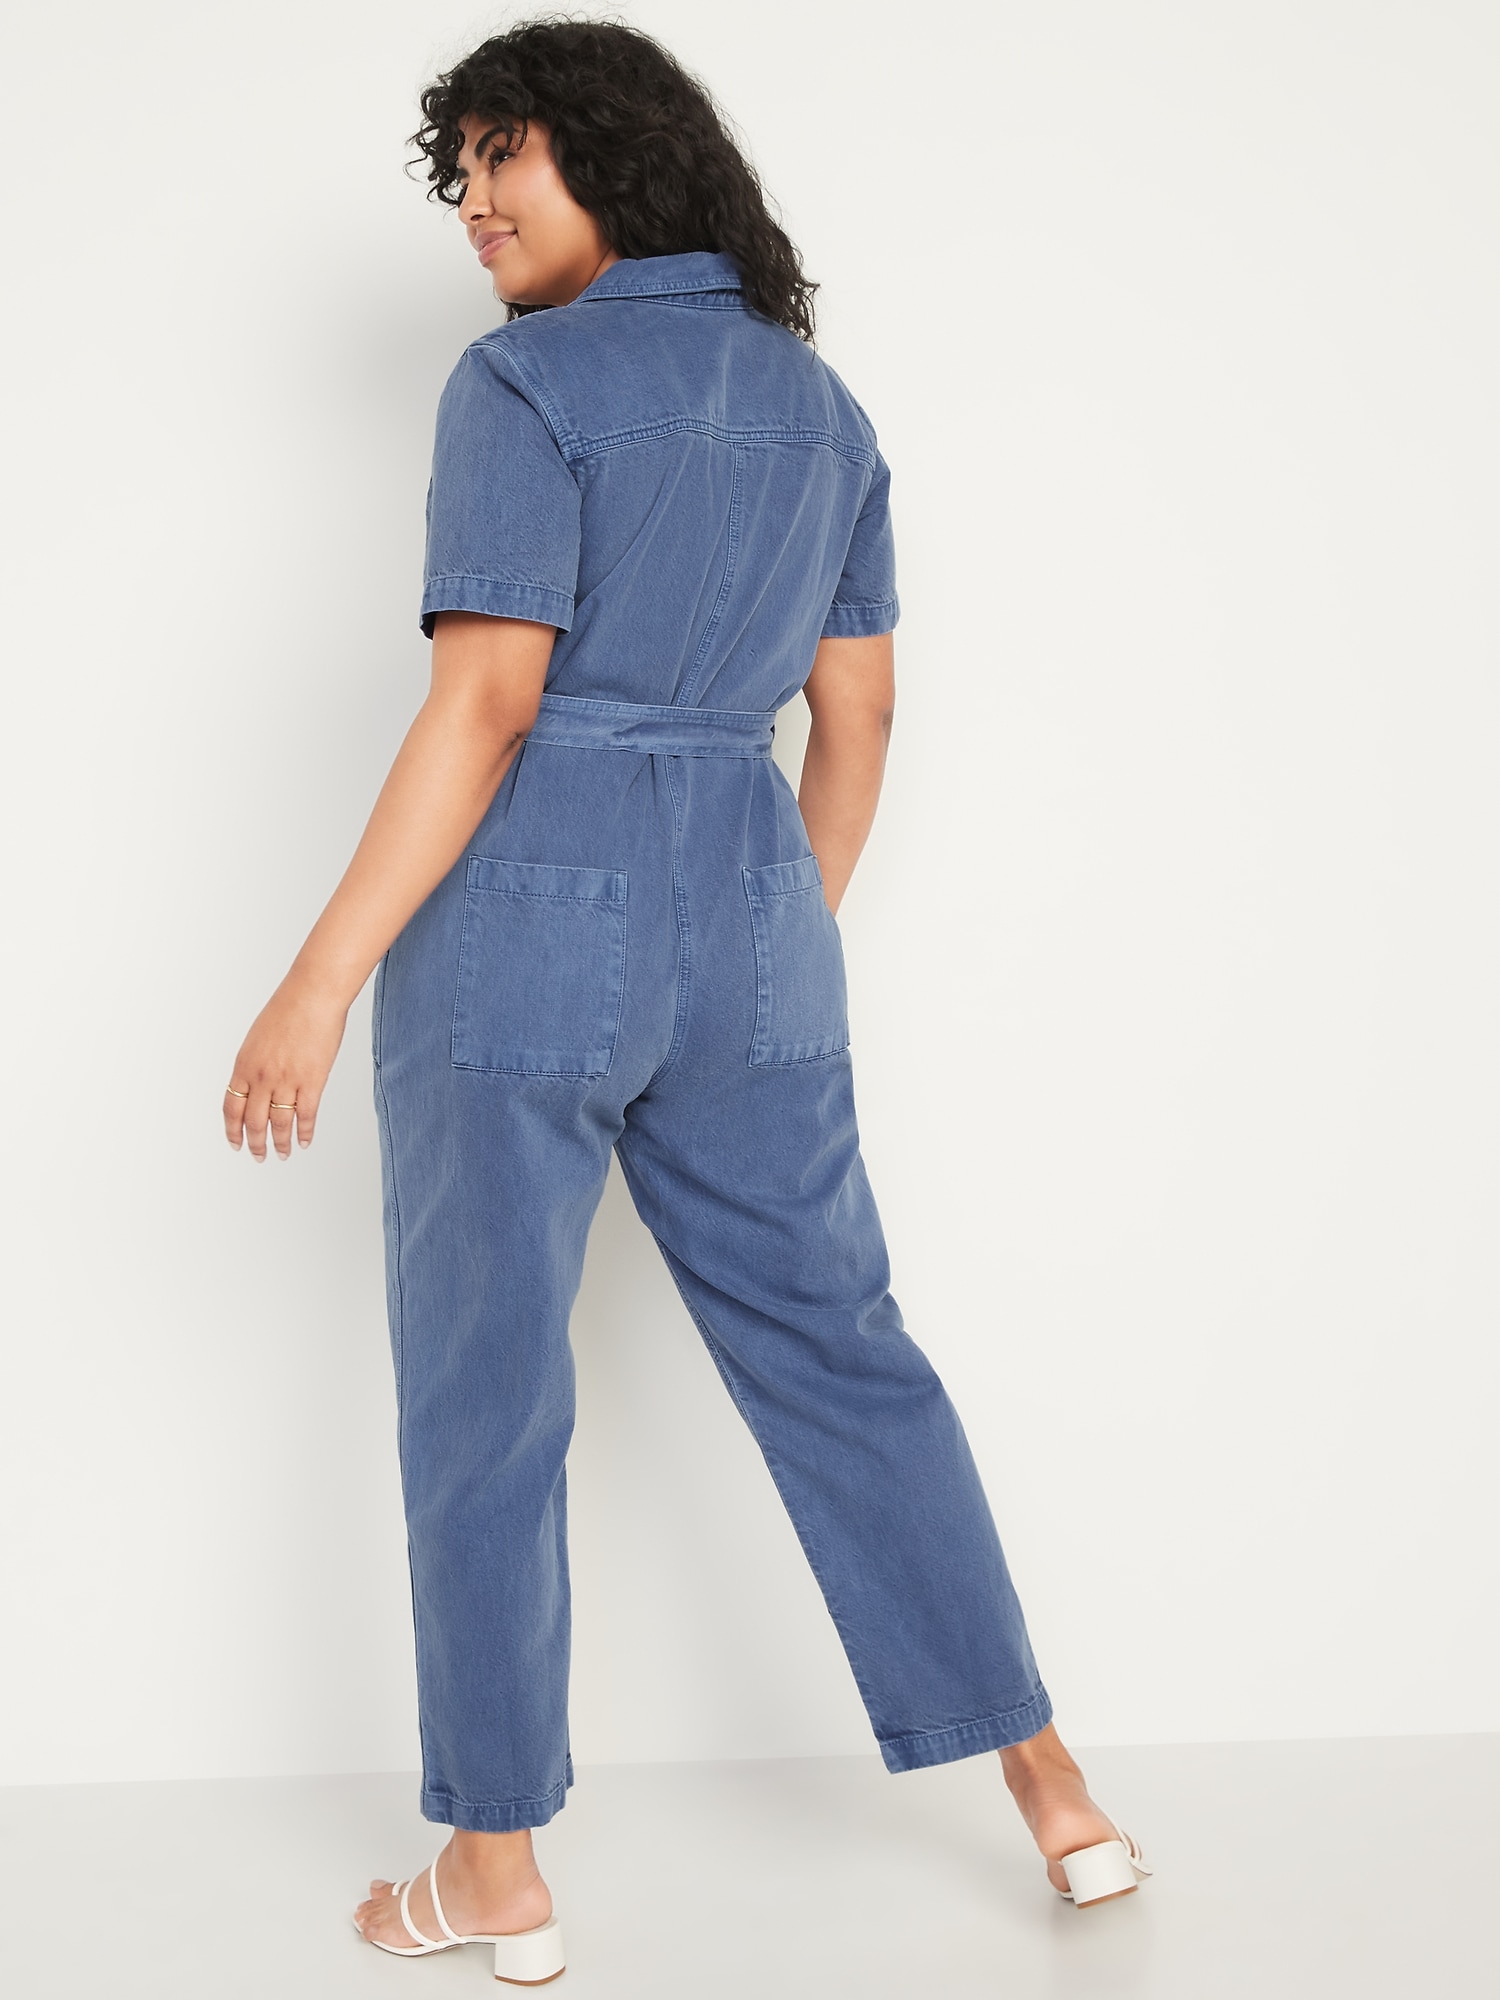  Cicy Bell Women's Short Sleeve Denim Jumpsuits Elastic Waist  Cropped Capri Jeans Rompers : Clothing, Shoes & Jewelry